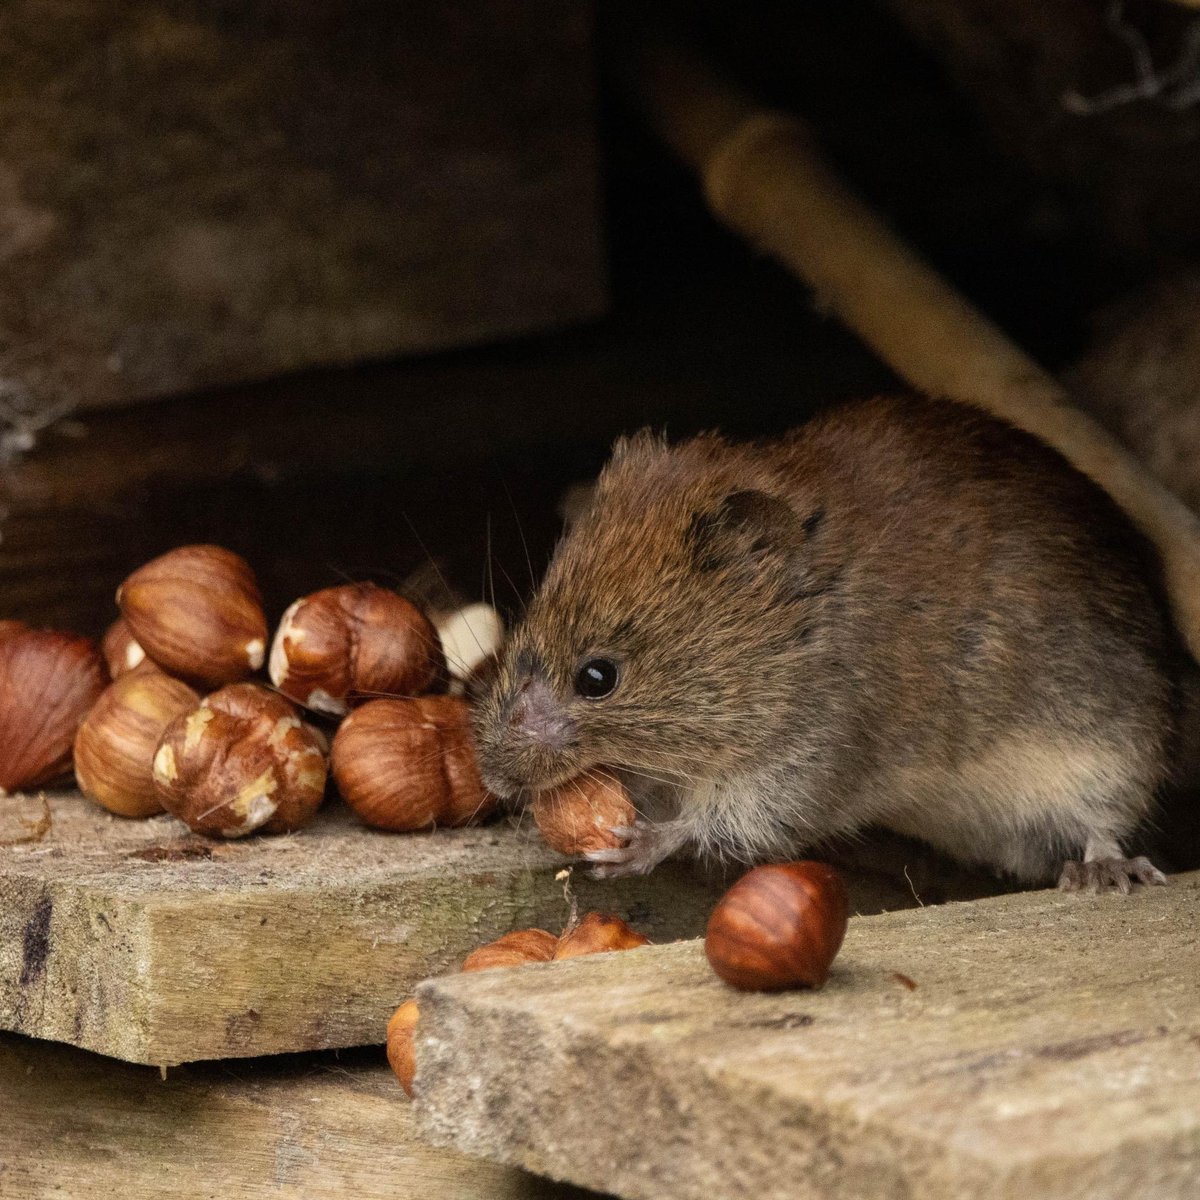 Bank voles - it didn’t take them long to realise there was an easy stash of nuts being put out for them! @labmammalgroup @Mammal_Society